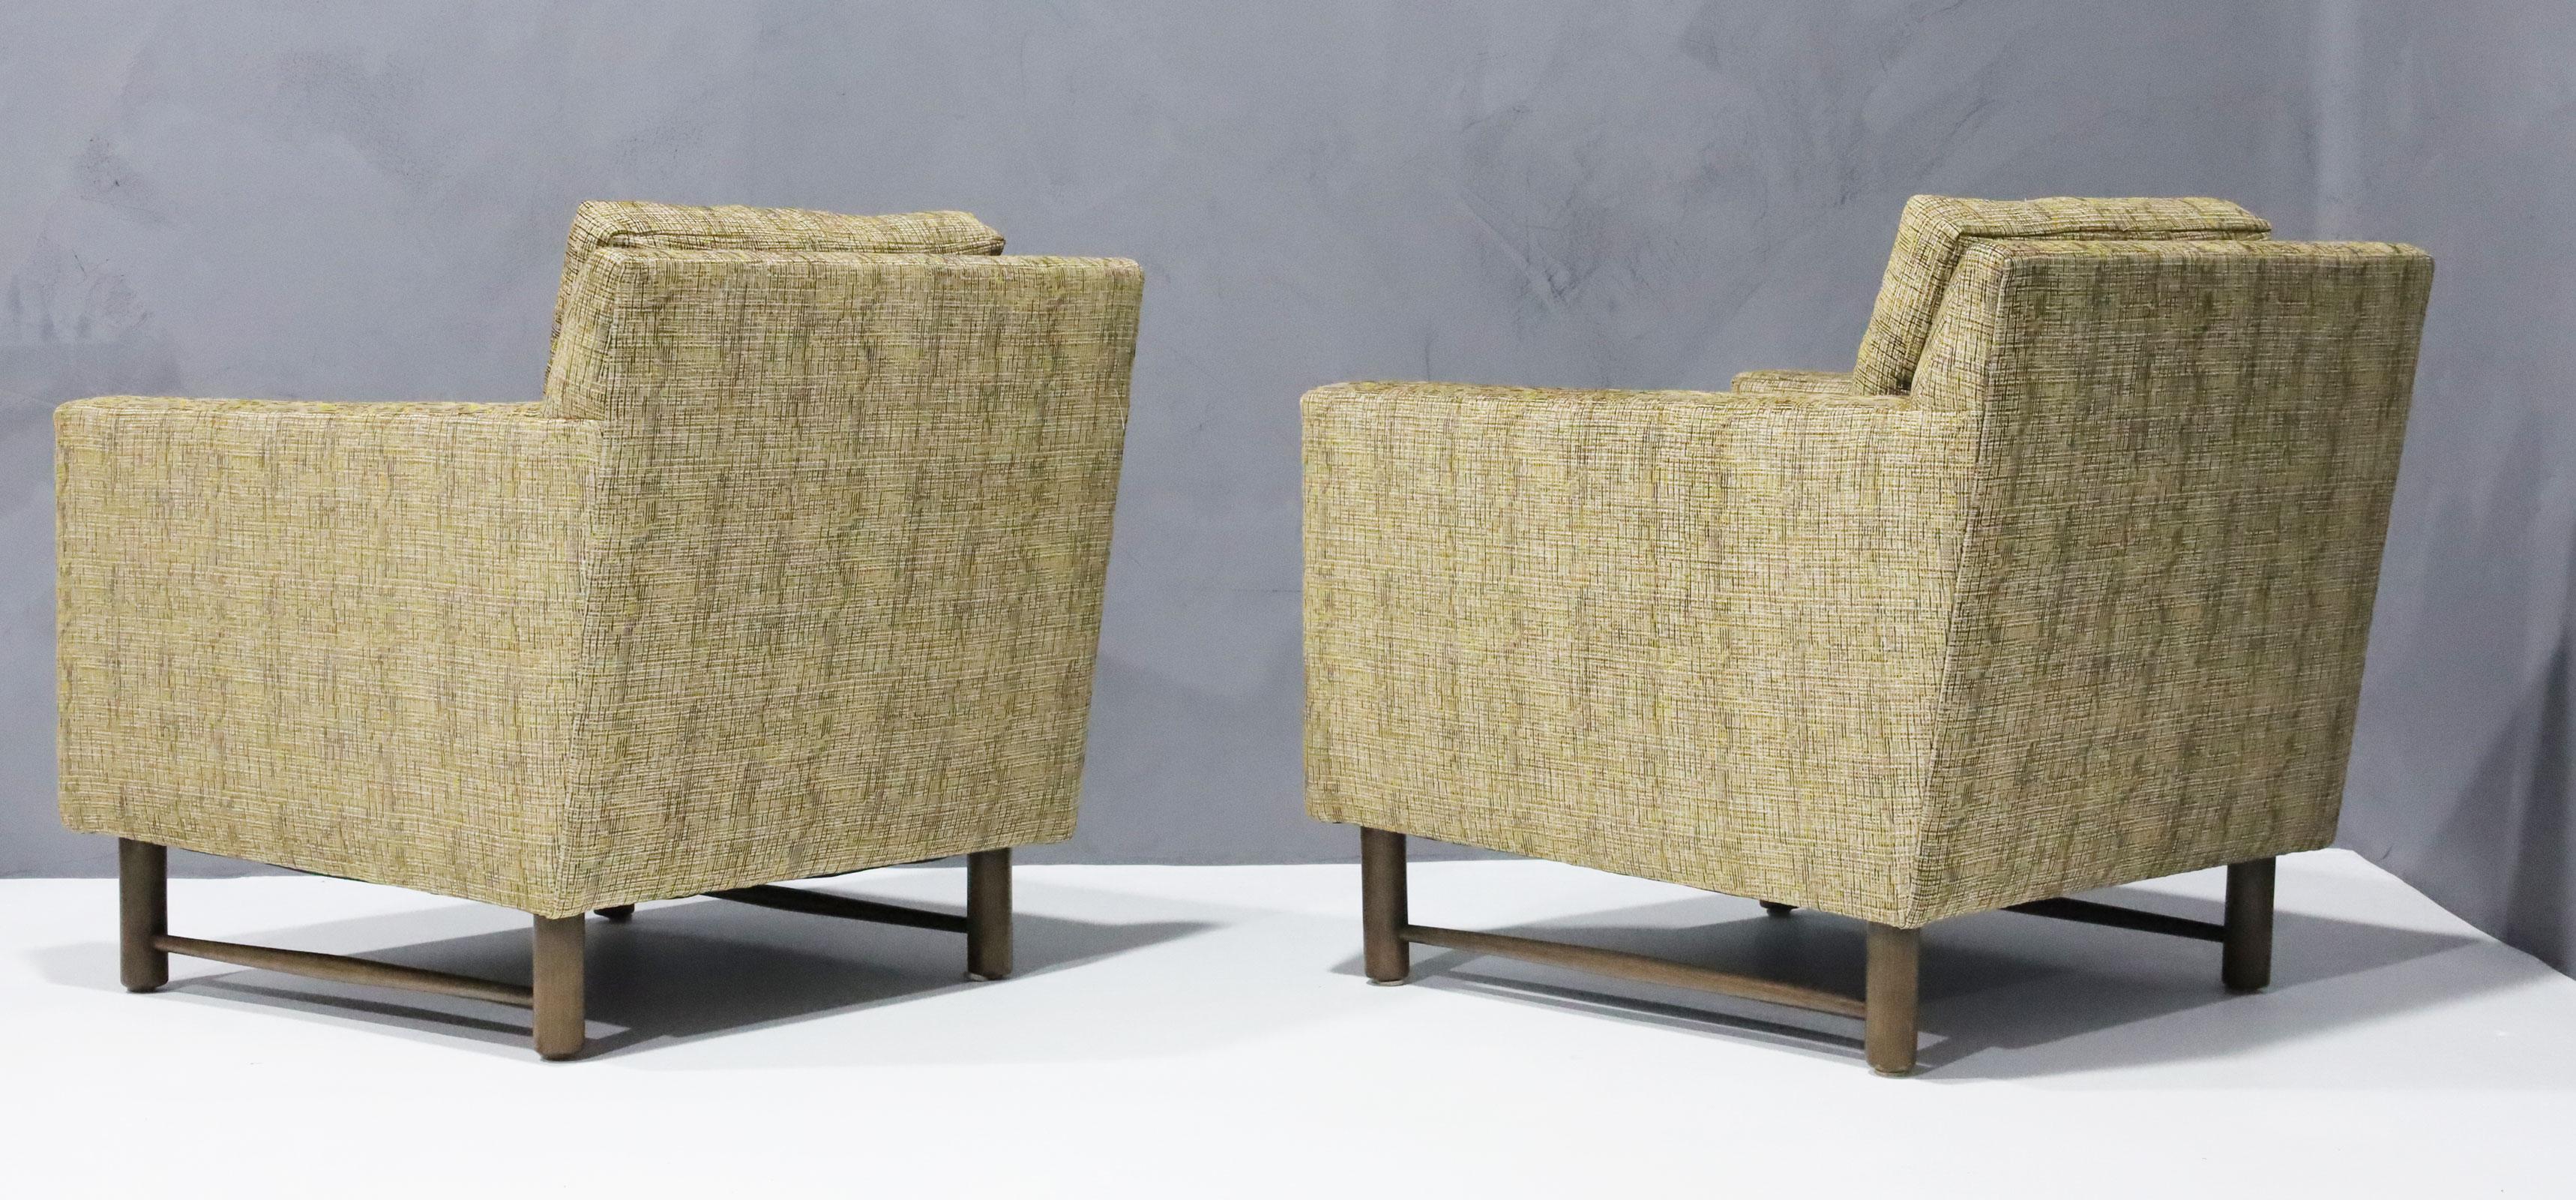 20th Century Edward Wormley for Dunbar Lounge Chairs in French Upholstery For Sale